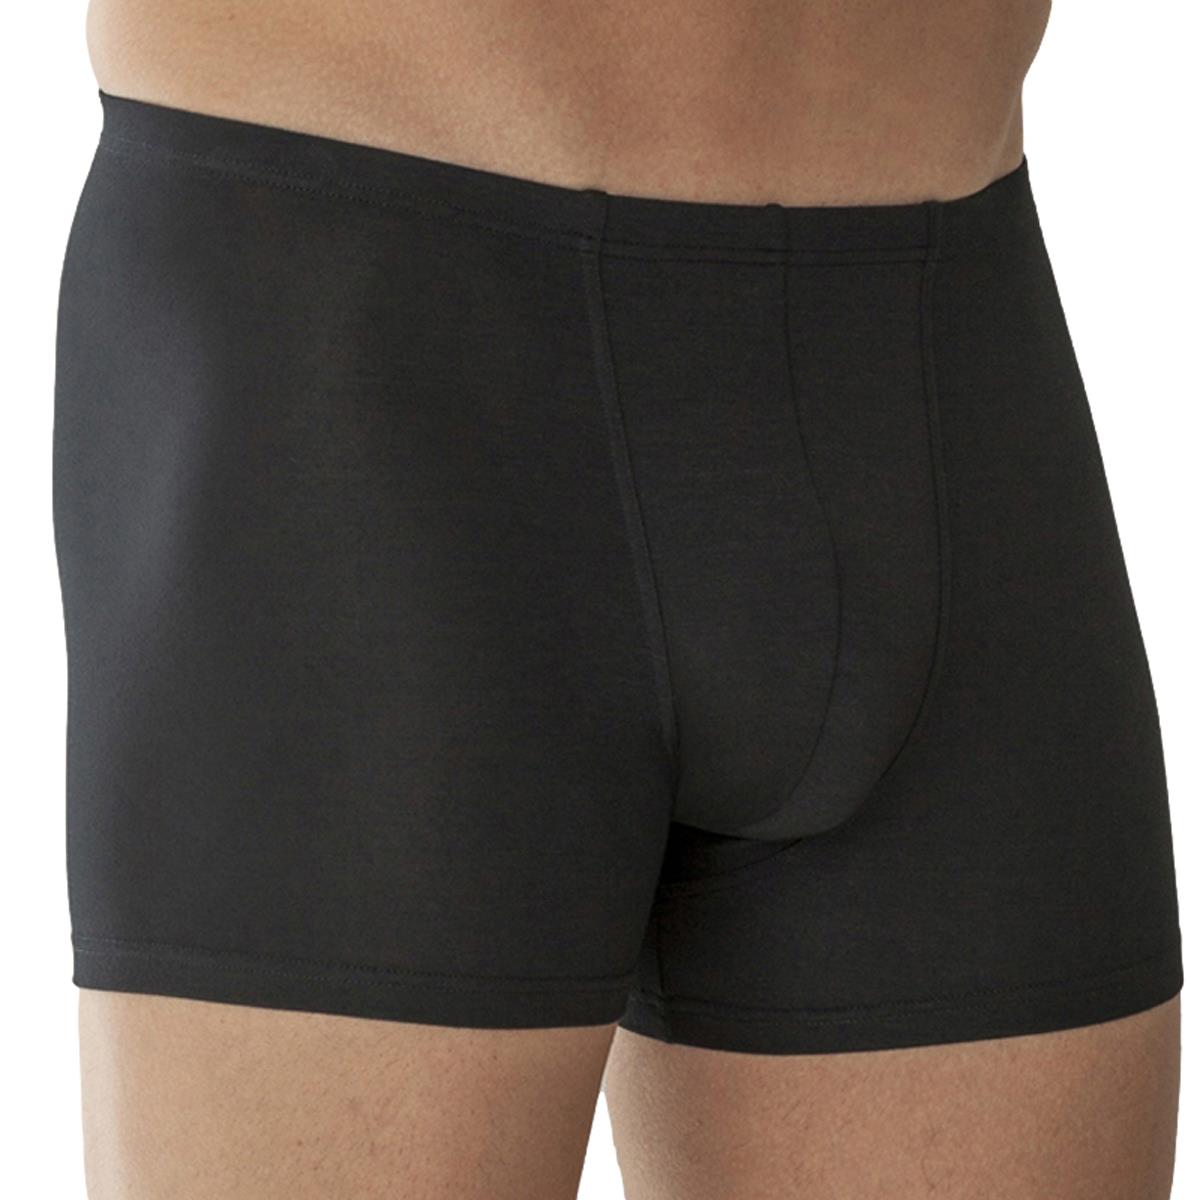 Buy Black Bamboo Signature A-Front Boxers 4 Pack from the Next UK